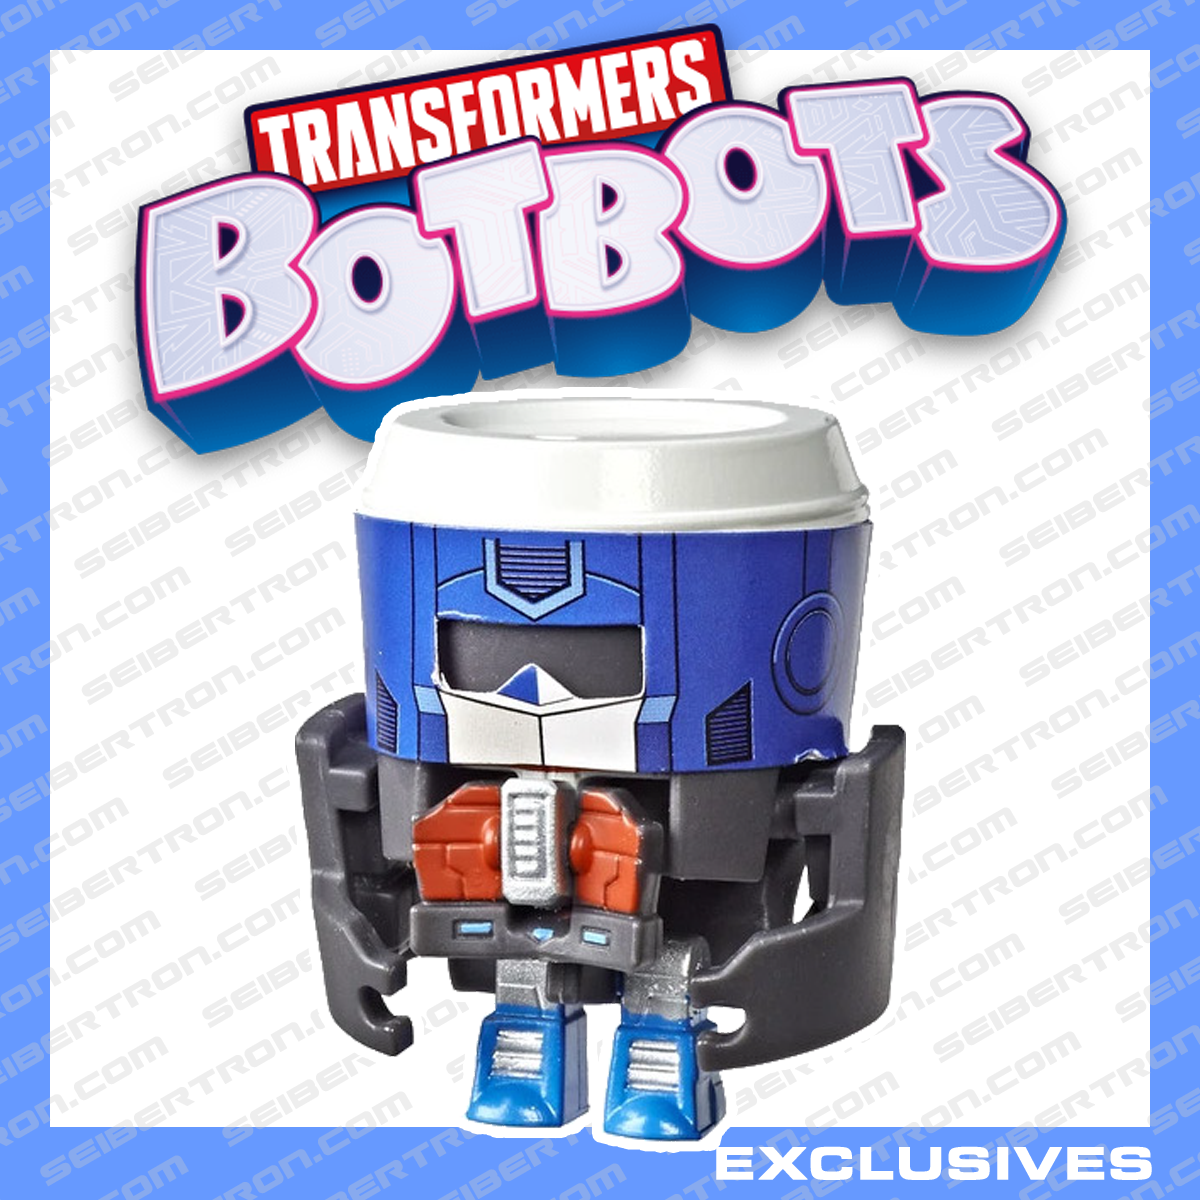 COFFEEMUS PRIME Transformers BotBots Con Crew Fantastic Fuelers coffee cup 2019